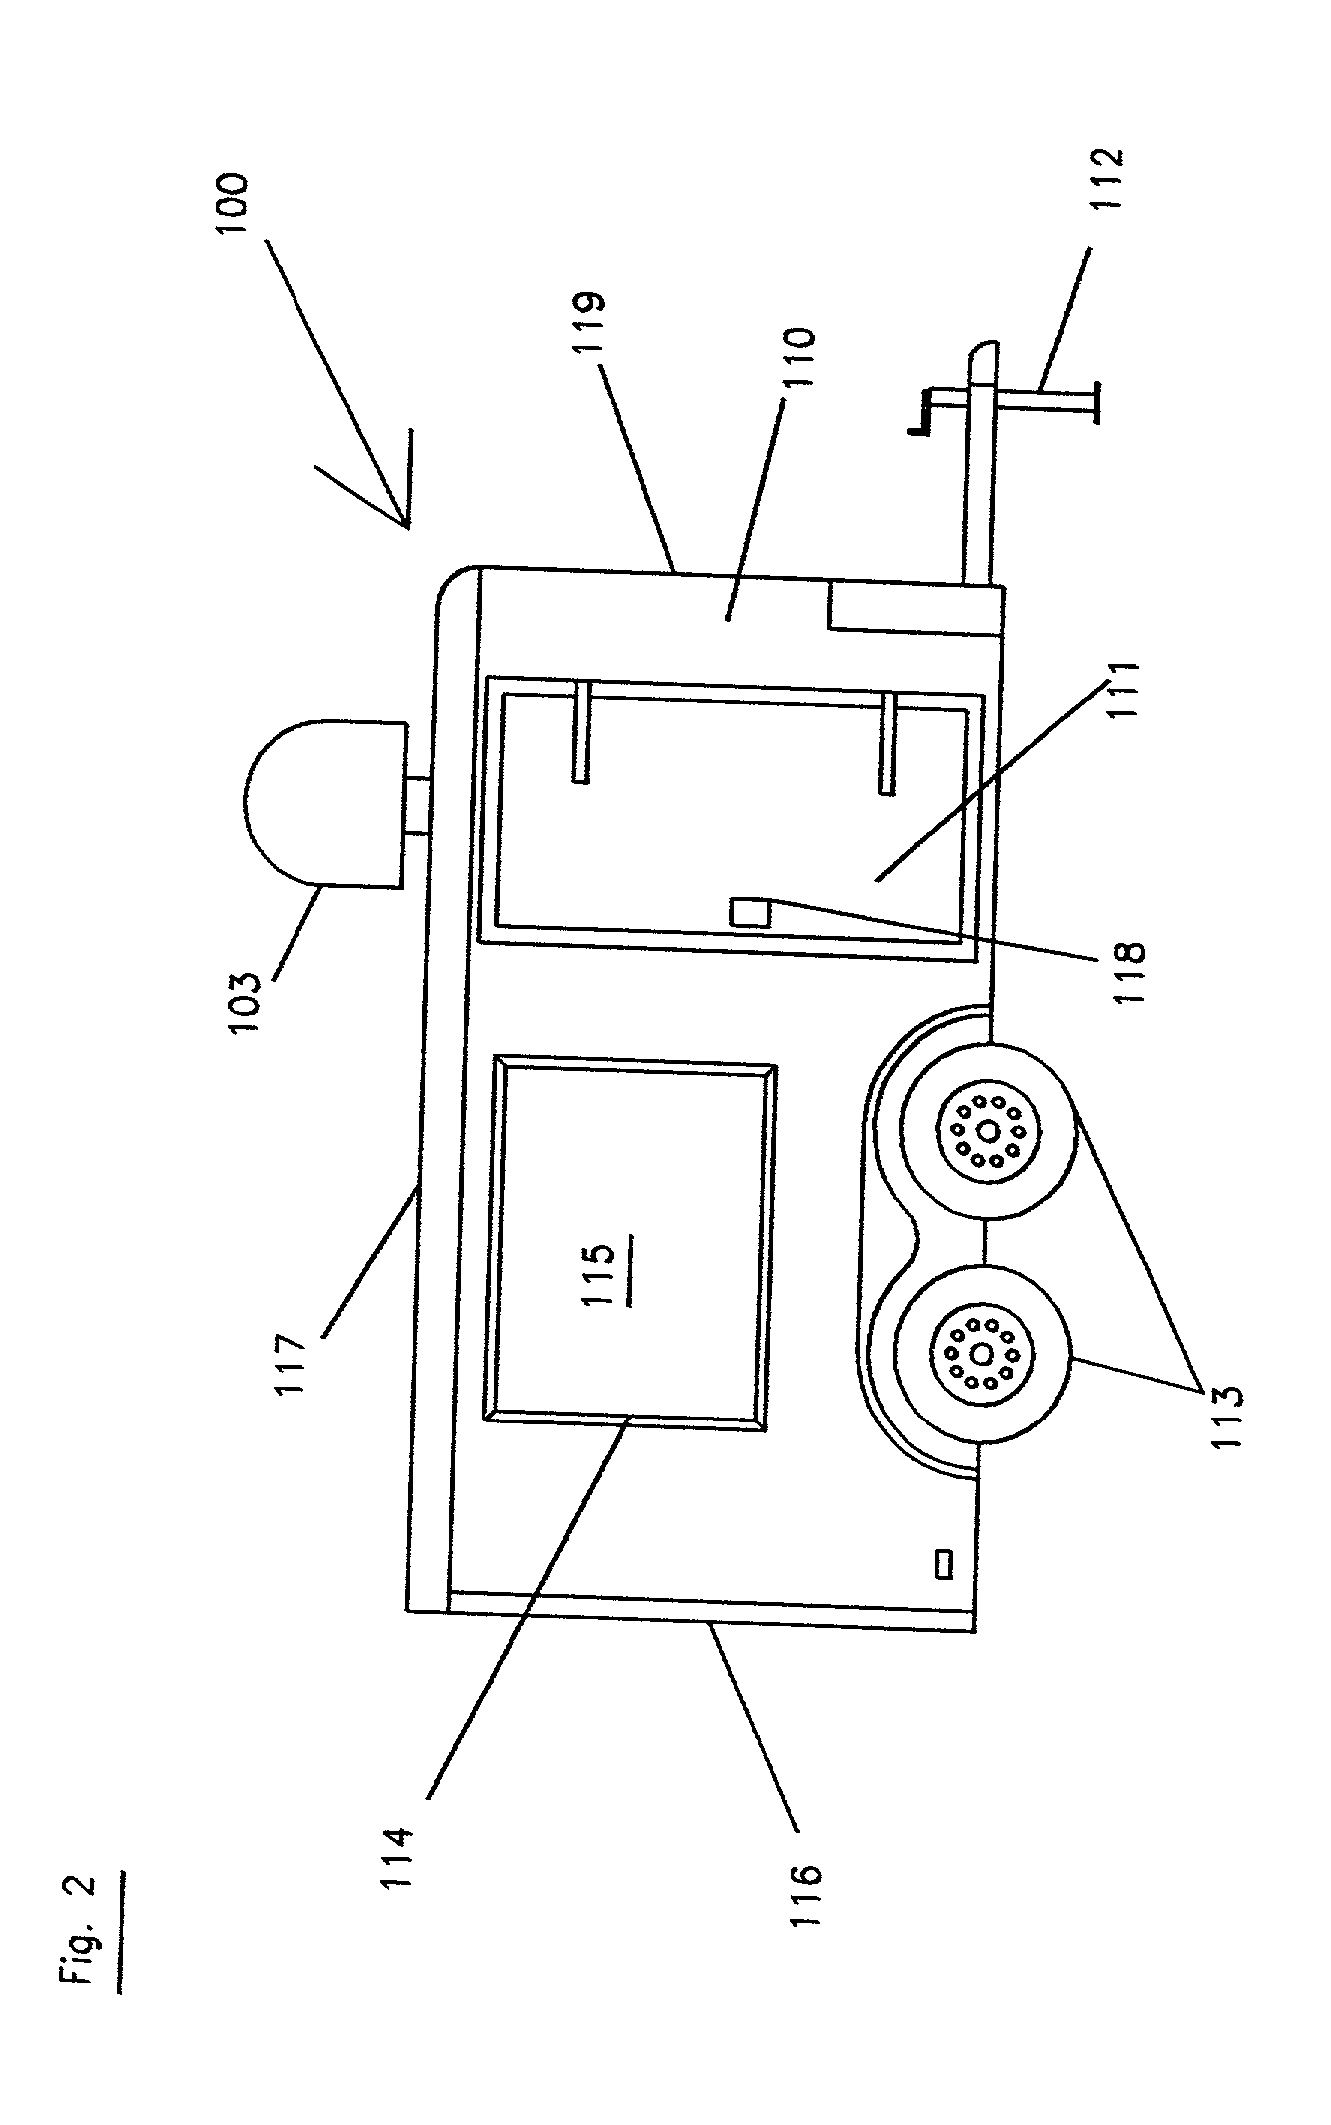 Multi-point, concurrent, video display system using relatively inexpensive, closed vehicles